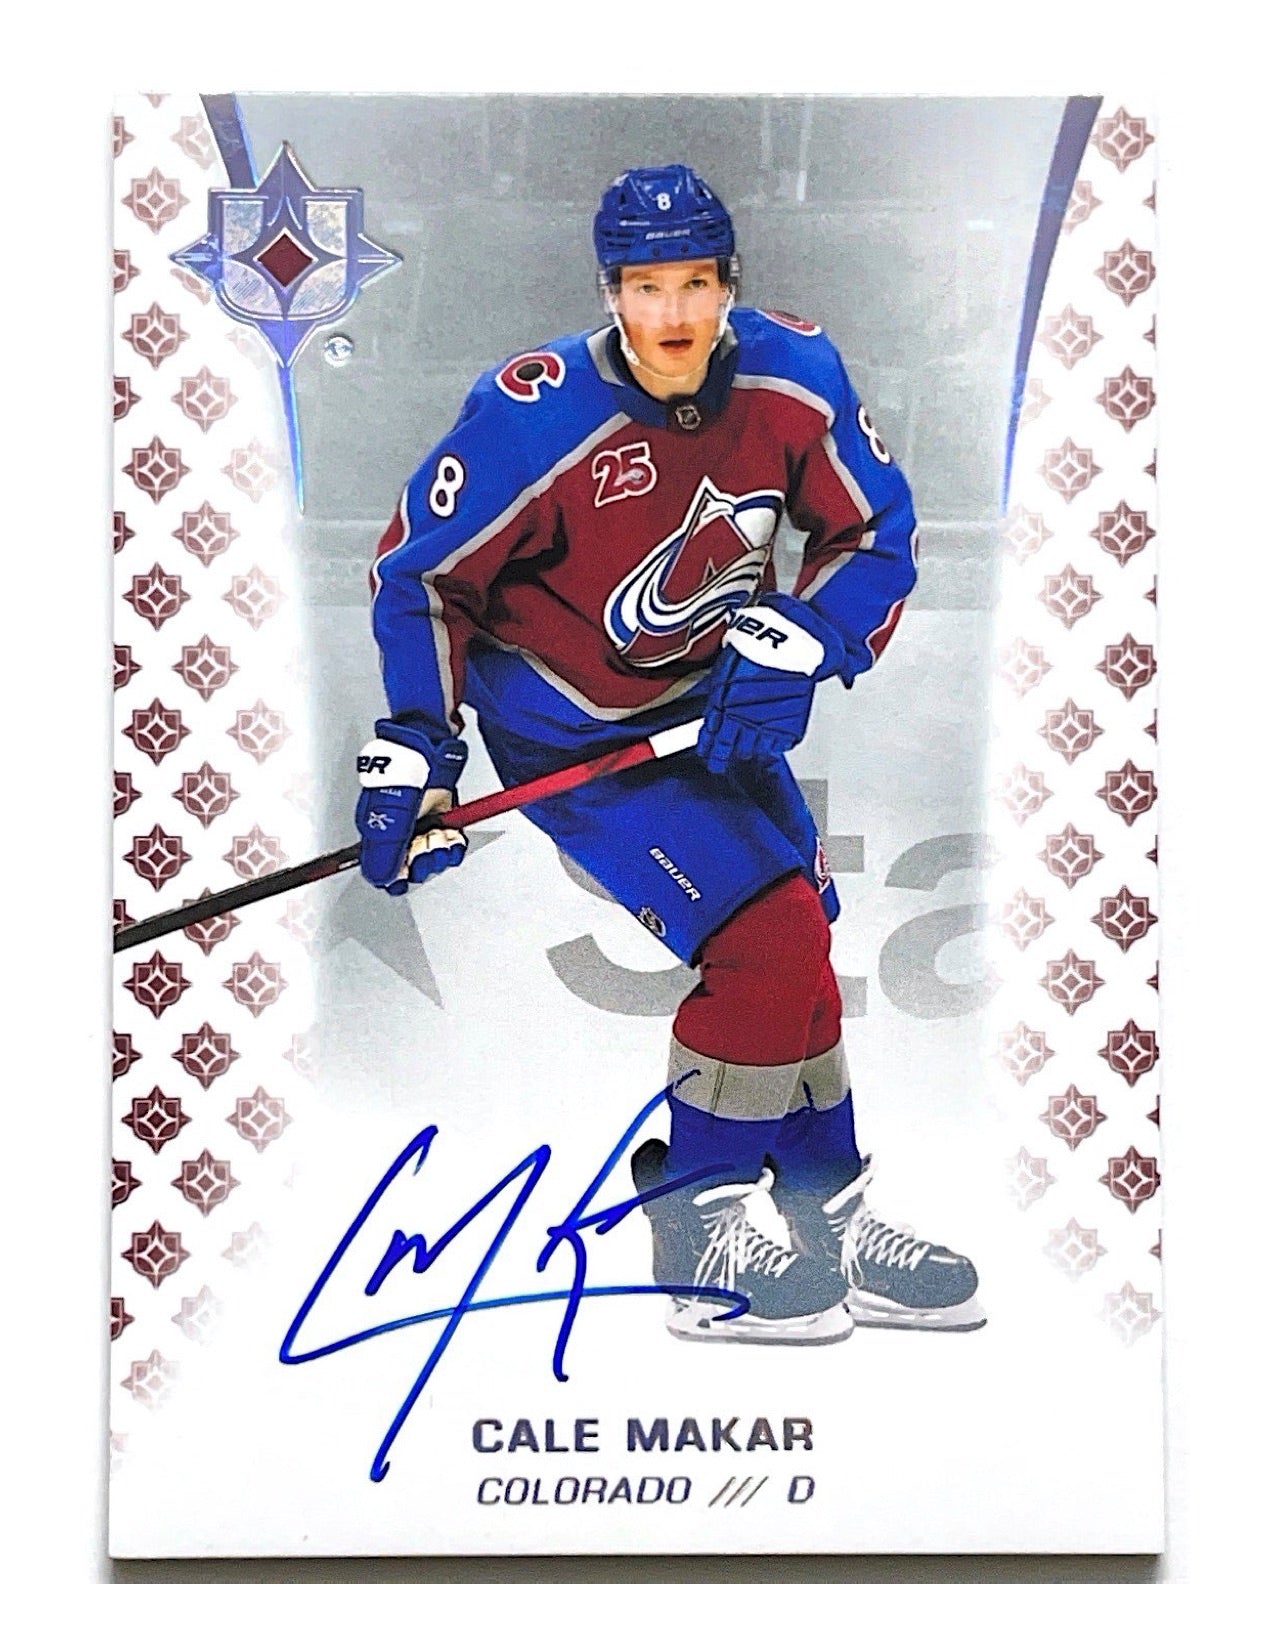 Cale Makar 2020-21 Upper Deck Ultimate Collection Autograph #55